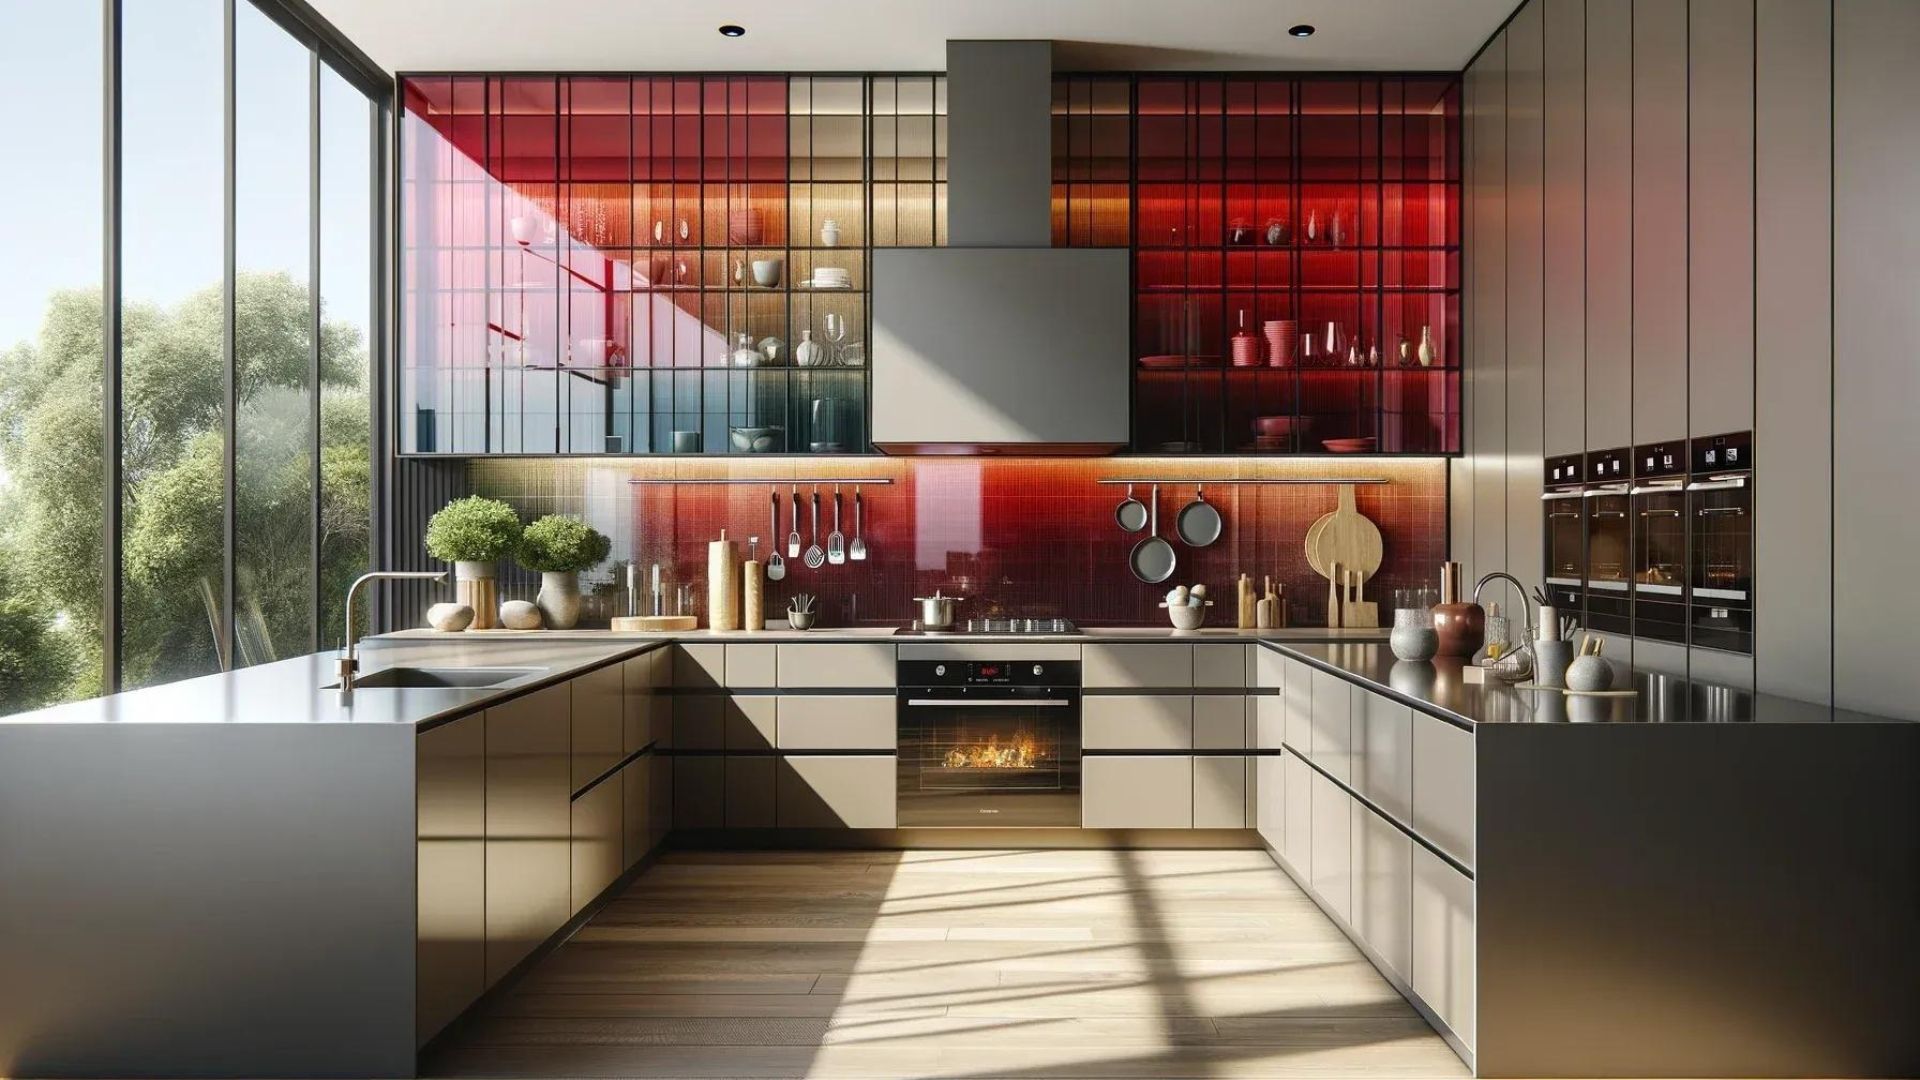 Getting a kitchen splashback installed or replaced? Learn 3 reasons why glass is a great material for the job.
